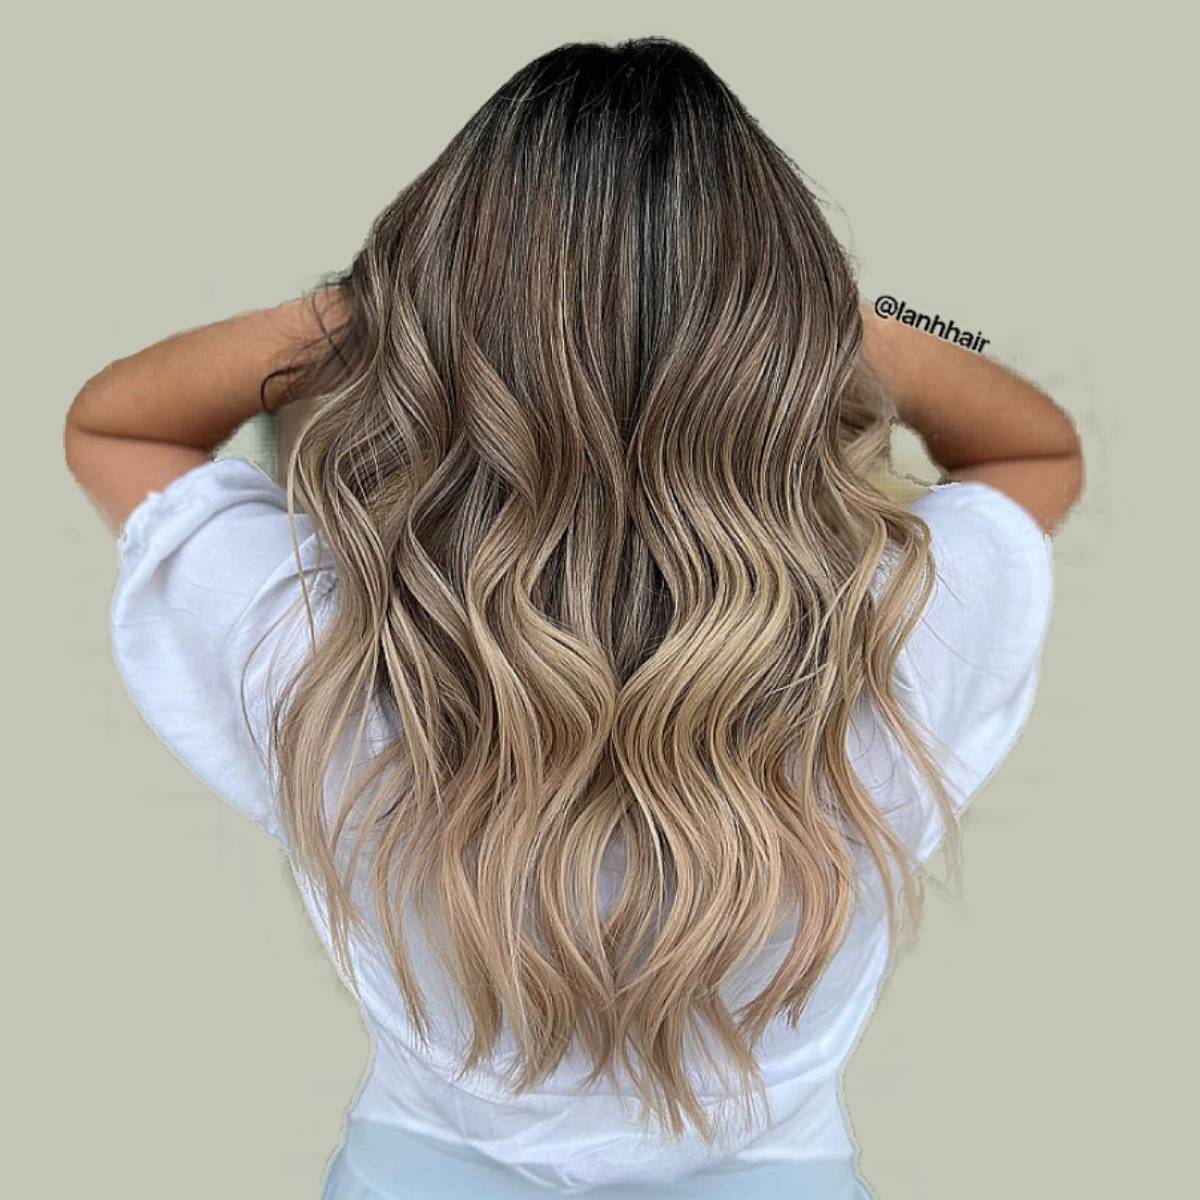 How To Create Custom Ombre Hair At Home